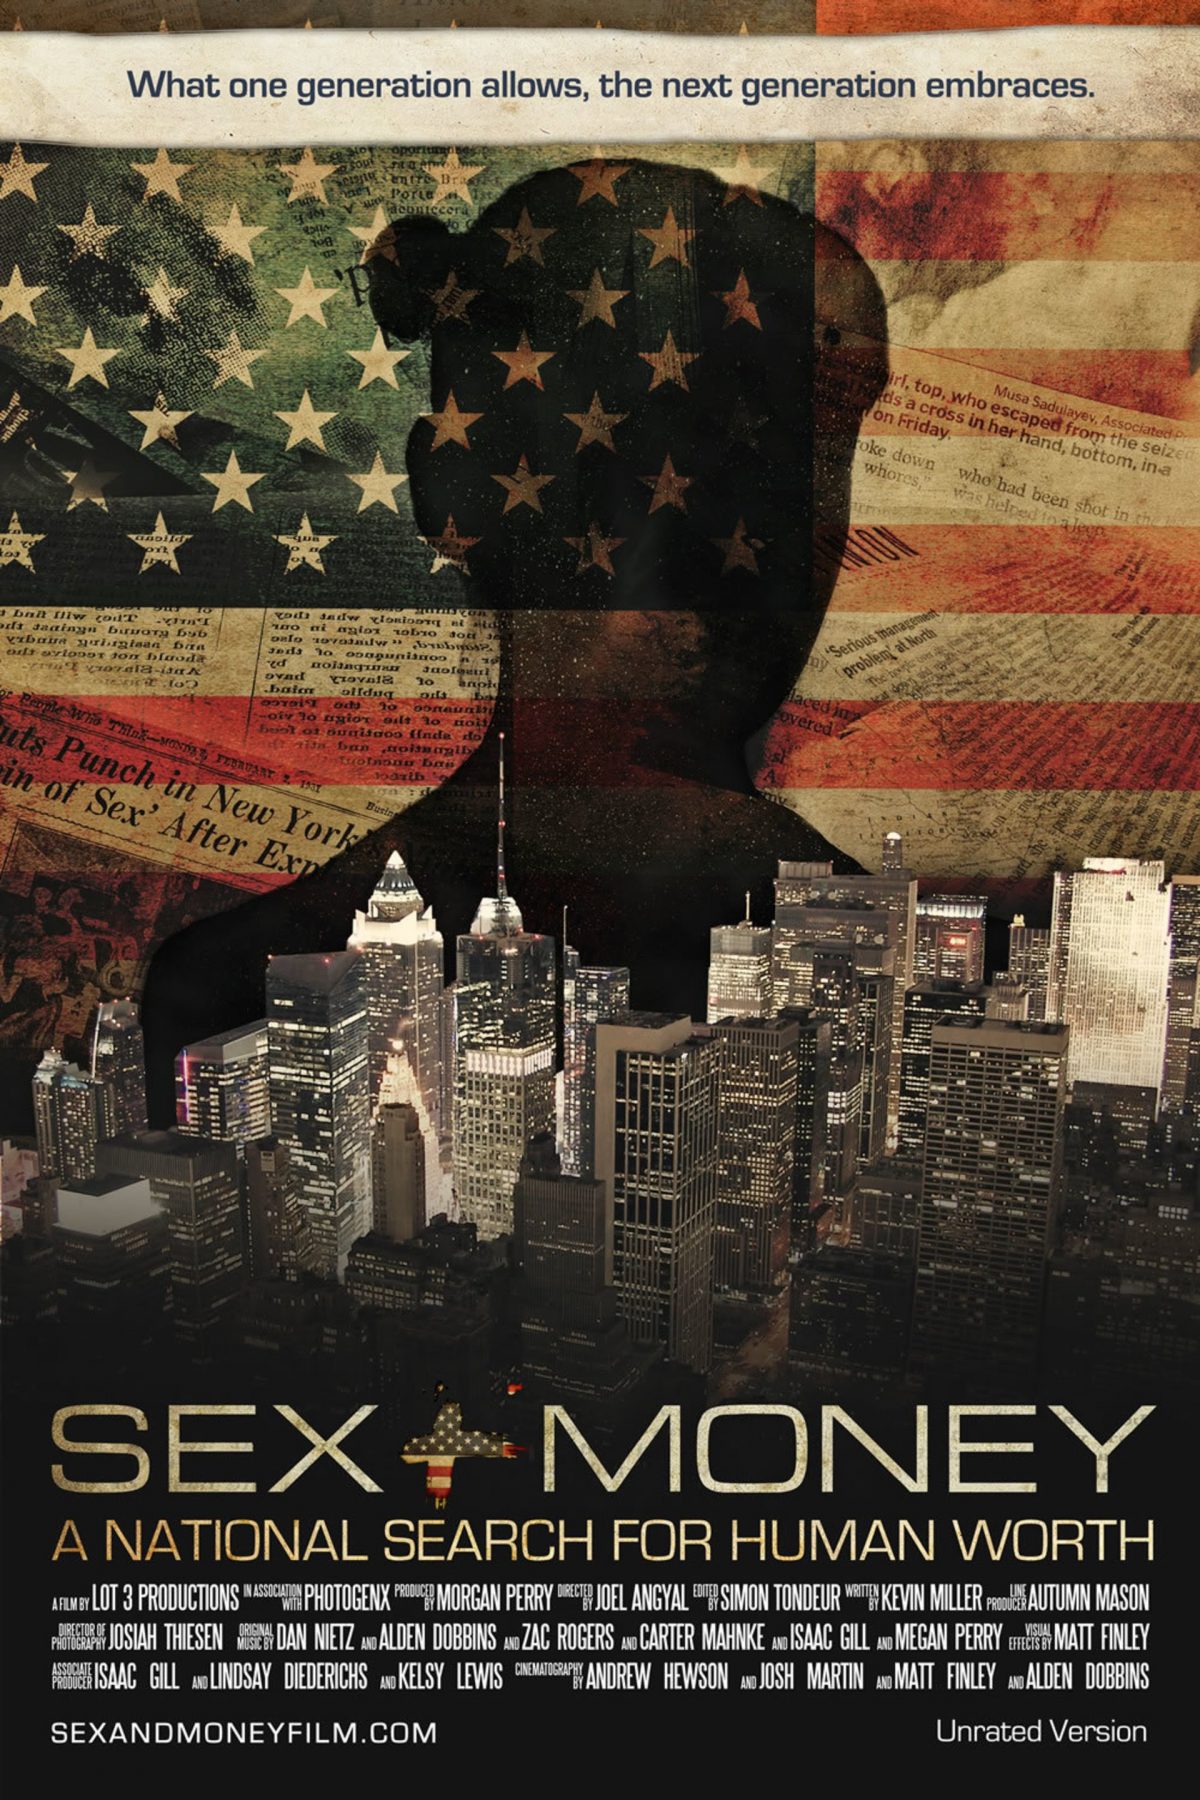 Sex+Money: A National Search for Human Worth - Northwest Film Forum